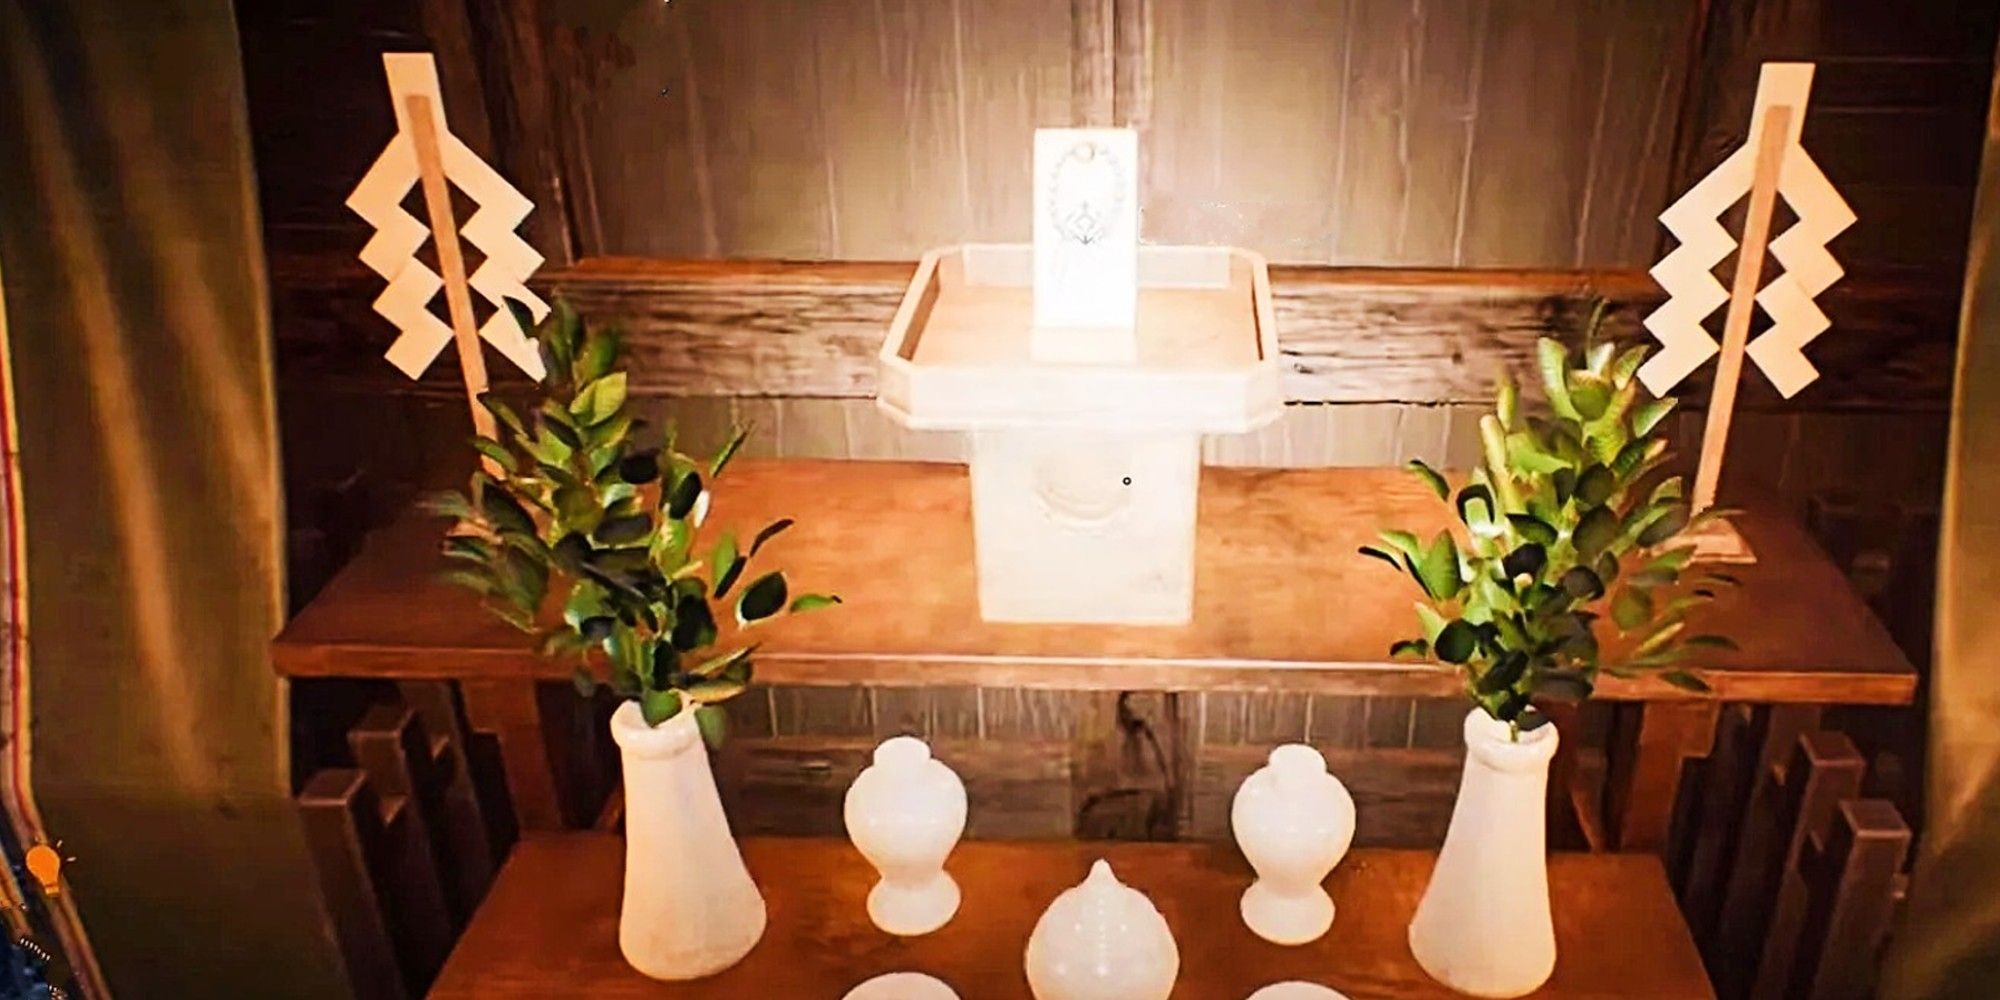 Amulets are placed on the altar, which glows under bright light.